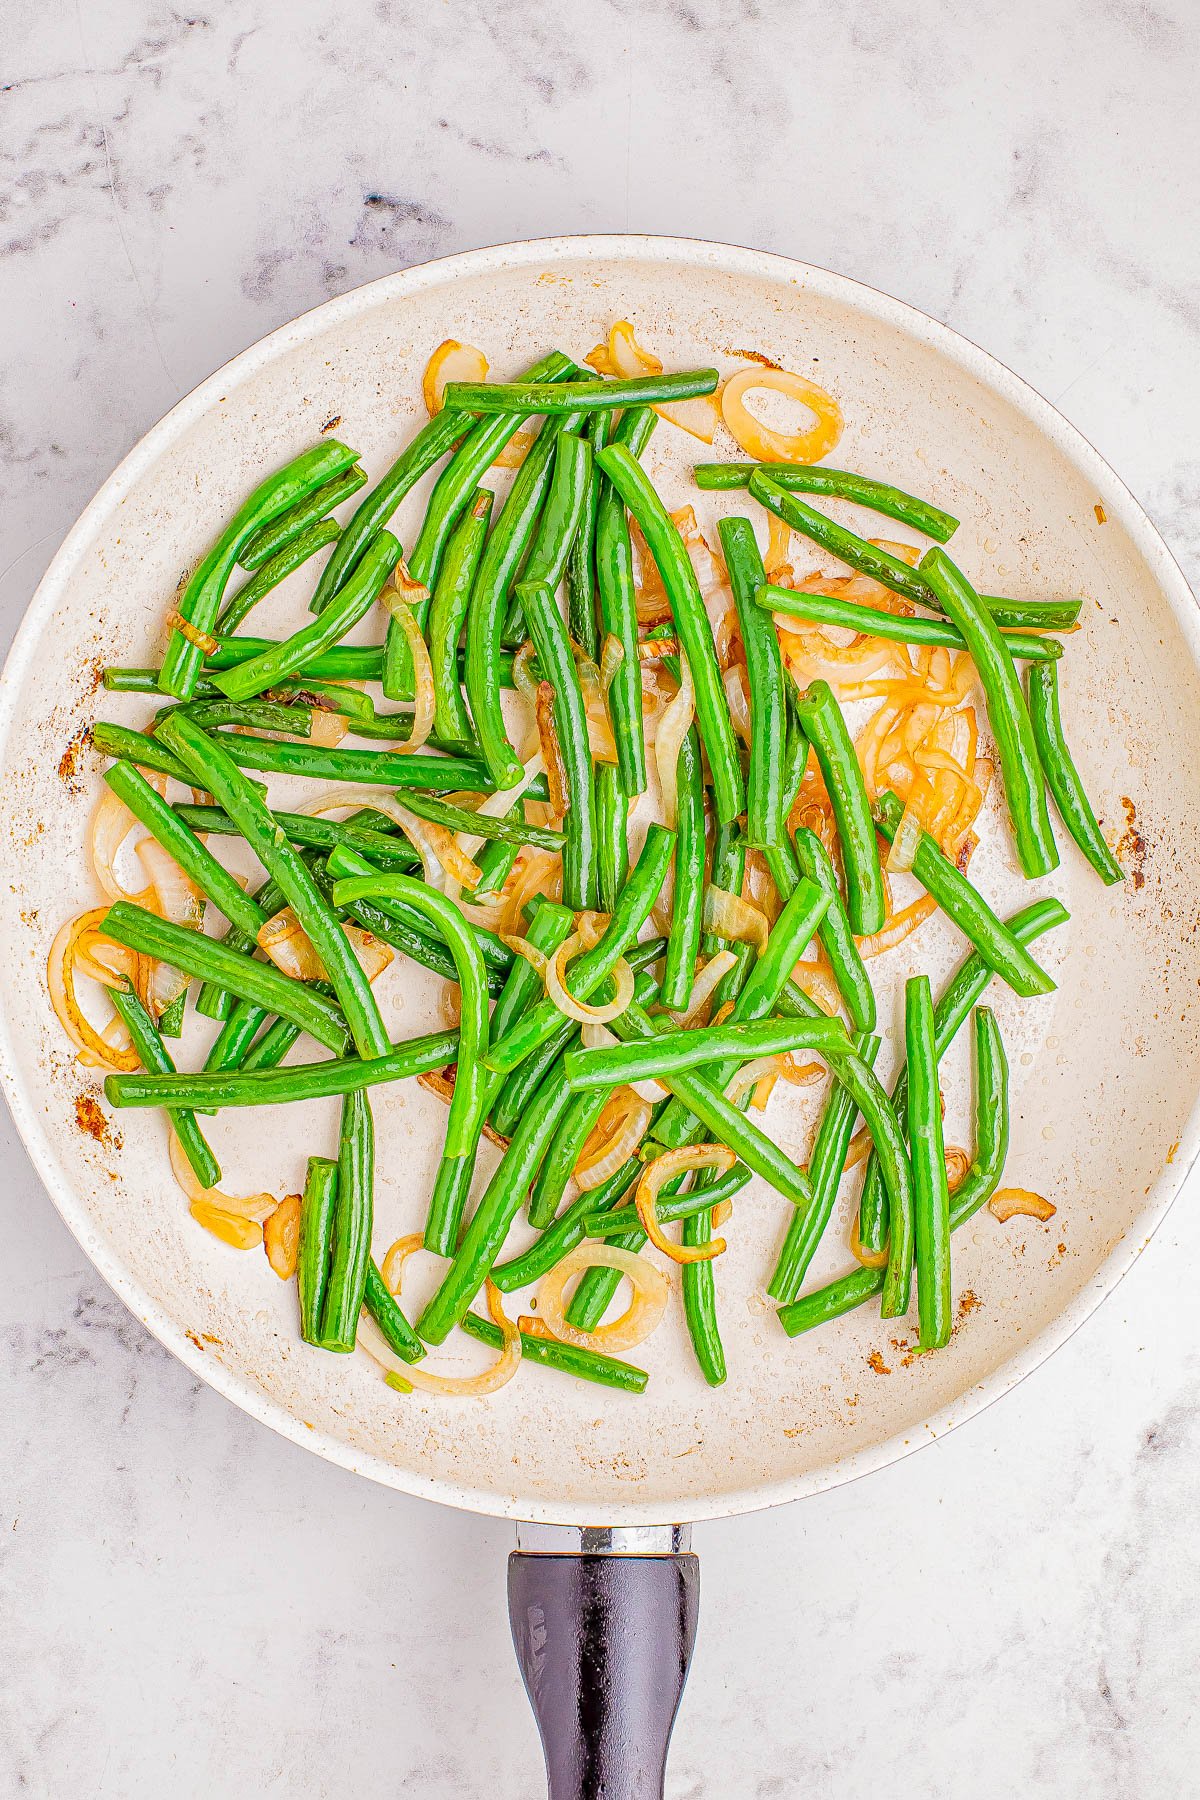 Cooked green beans and sliced onions in a white frying pan on a marble surface.